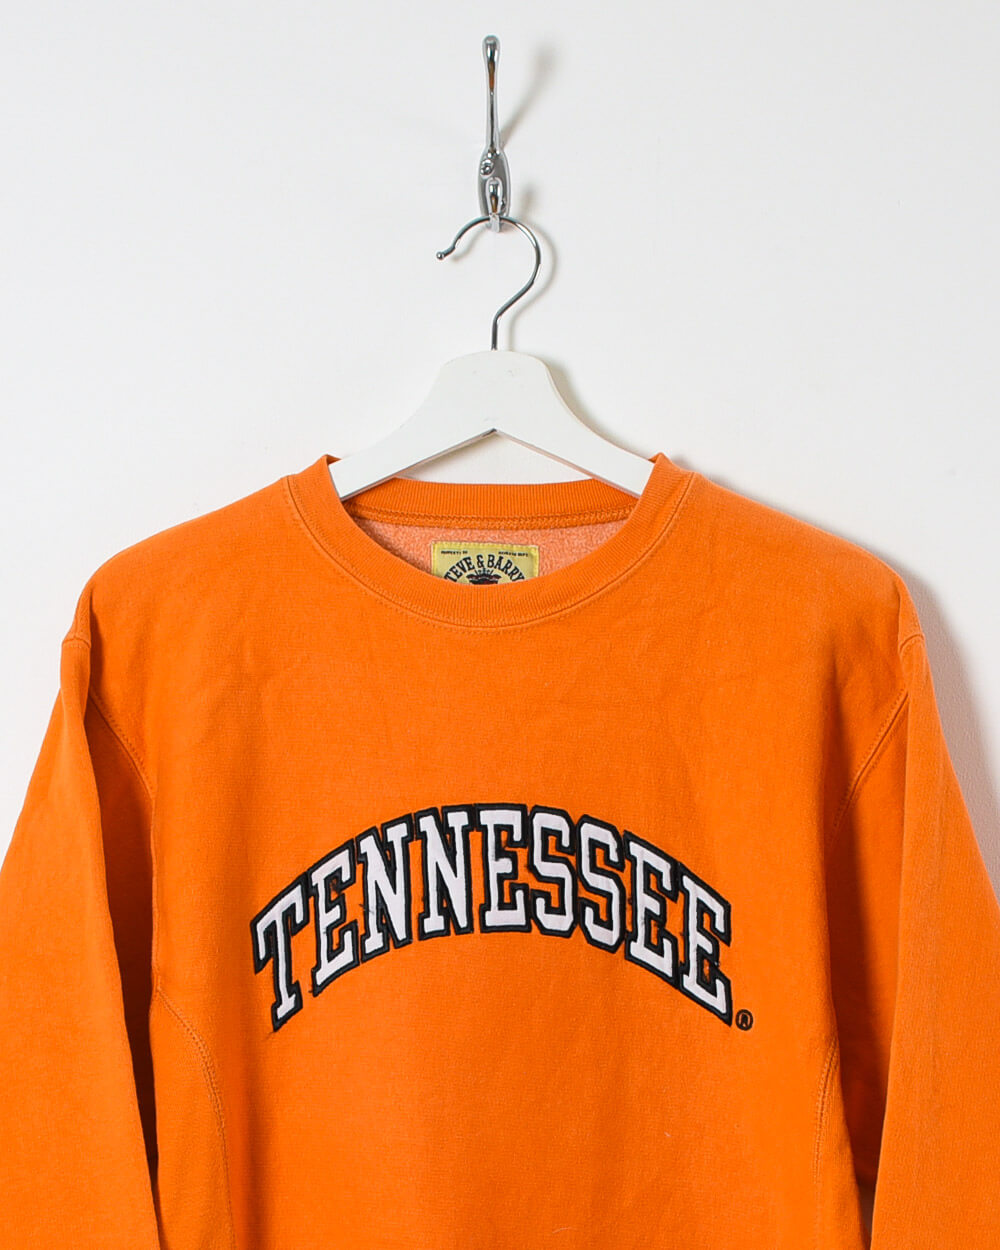 Tennessee Sweatshirt - Small - Domno Vintage 90s, 80s, 00s Retro and Vintage Clothing 